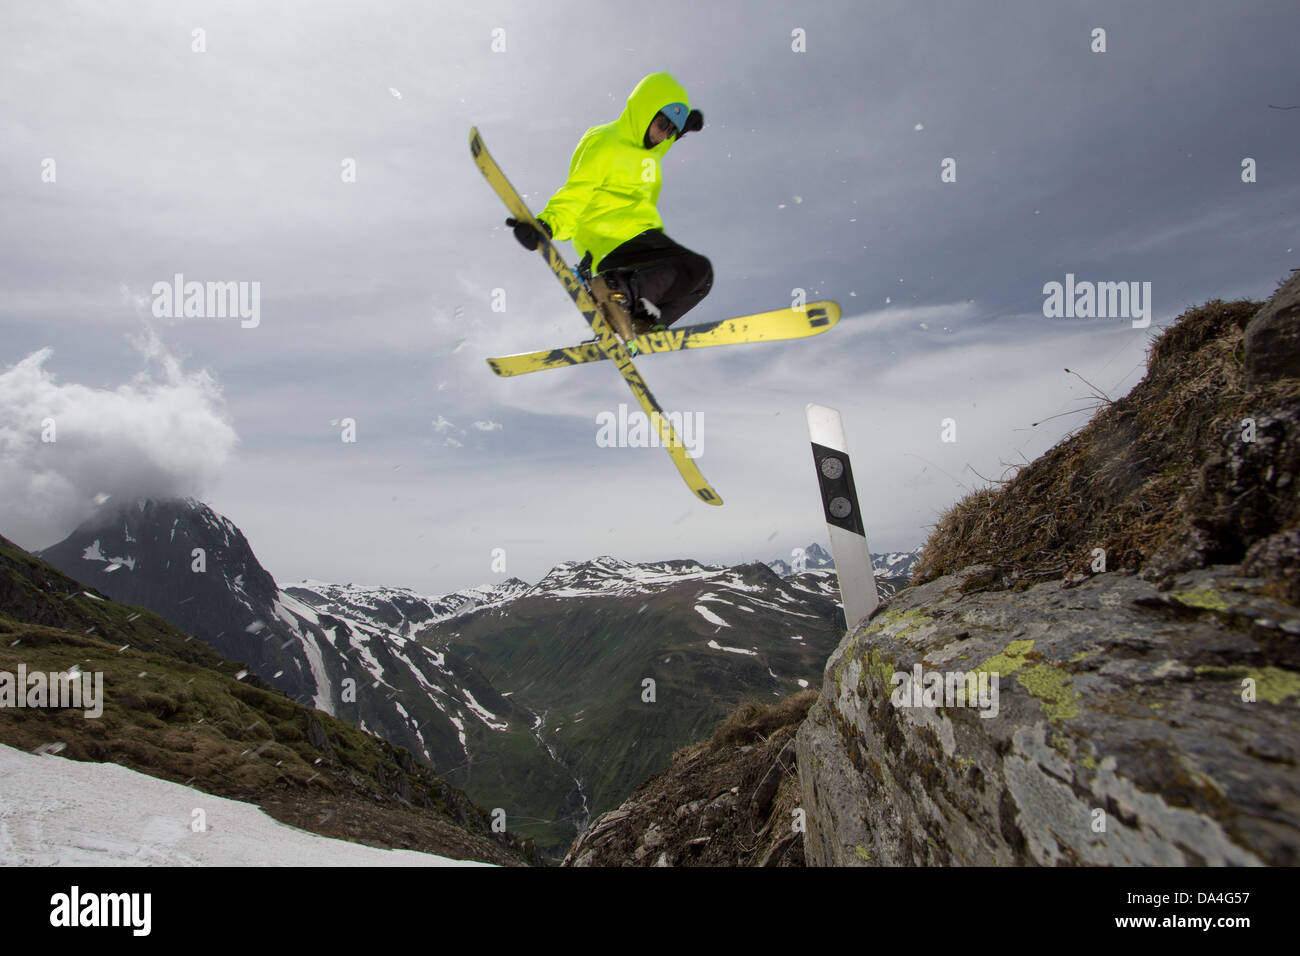 NUFENEN, VALAIS, SWITZERLAND. A freestyle freeskier is executing a trick on a handmade kicker to jump over a road marker. Stock Photo